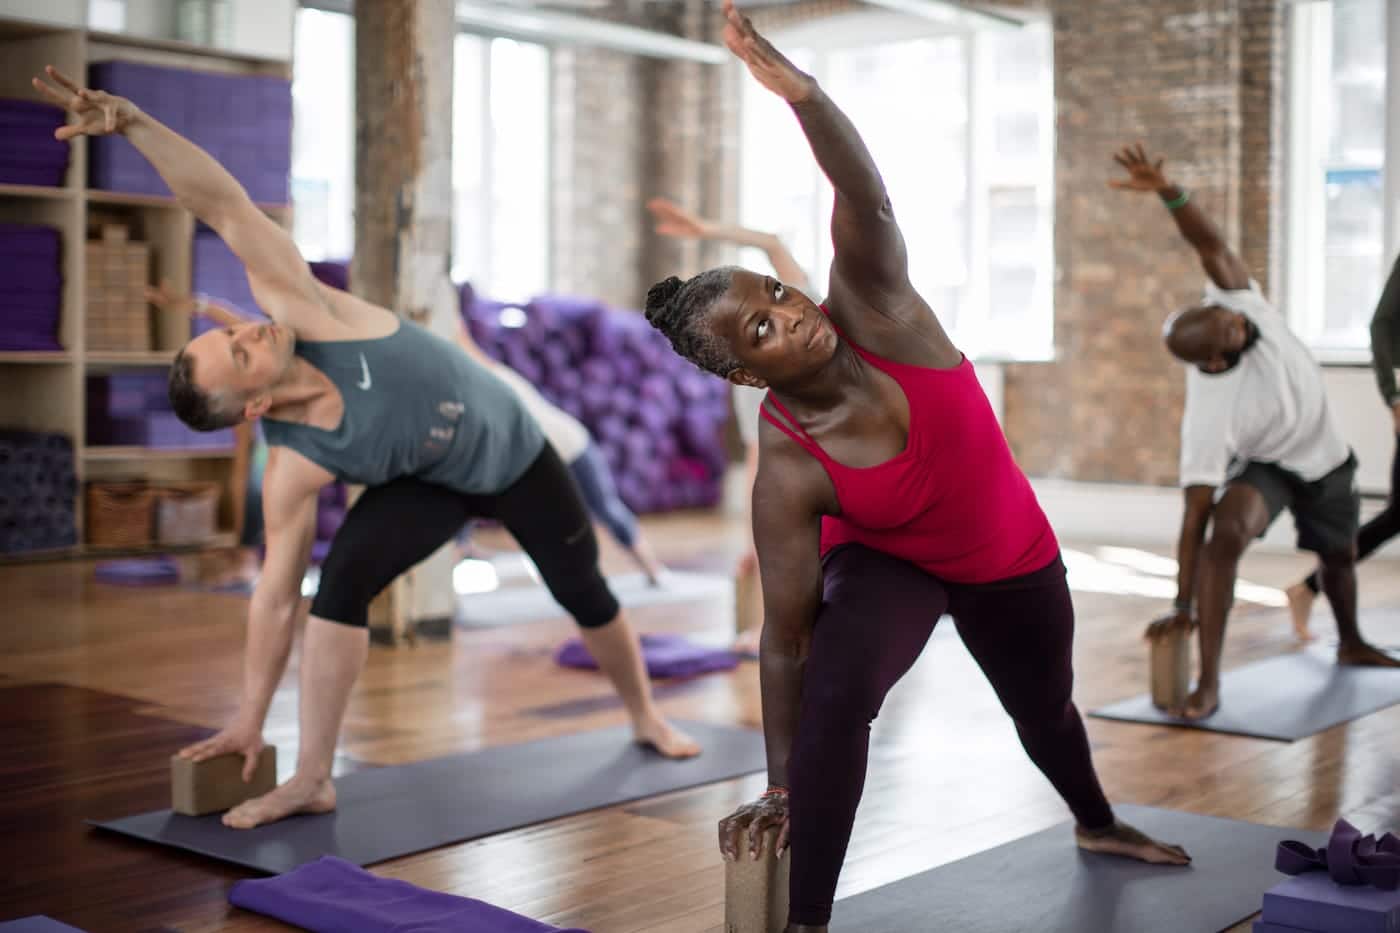 triyoga – London’s Destination For Yoga, Pilates And Treatments Joins United Fitness Brands